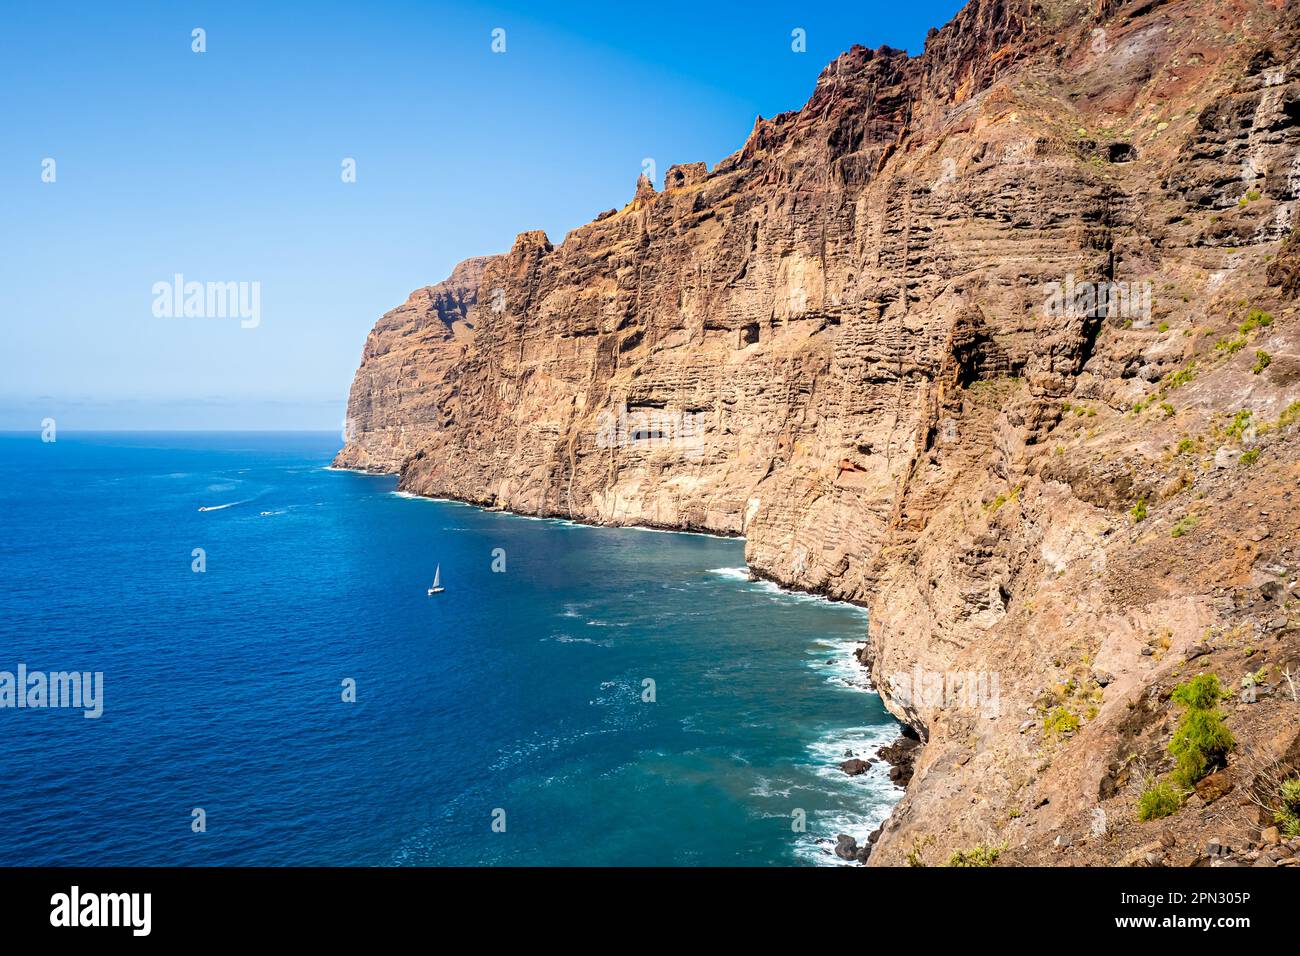 Los Gigantes cliffs tower above the rocky coastline of Tenerife's western shore while a small sailboat sails through the calm waters. Stock Photo